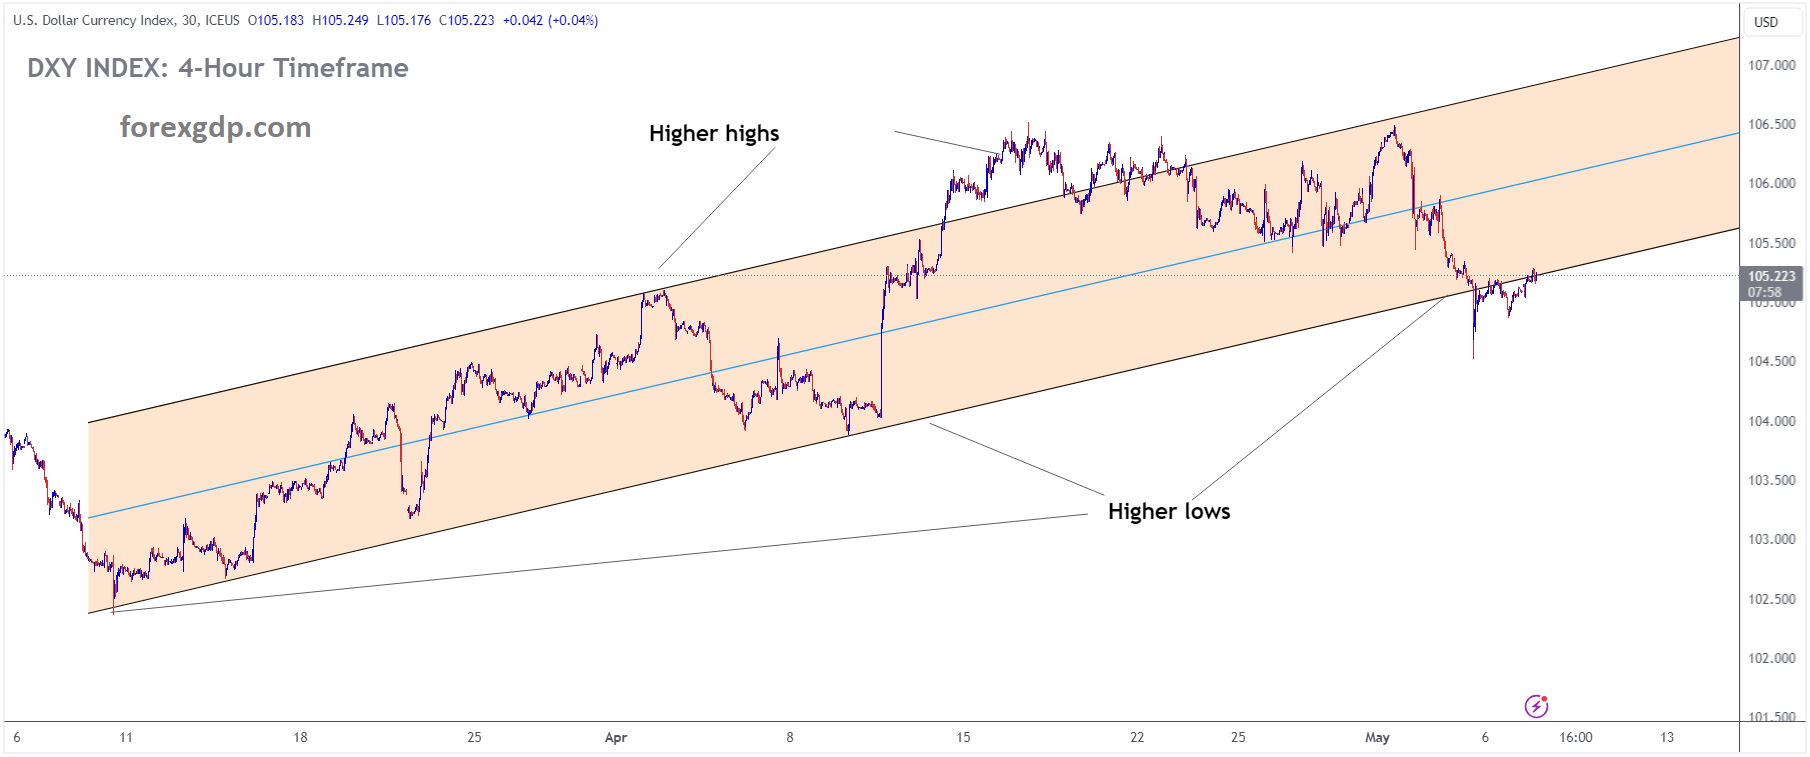 USD INDEX is moving in an Ascending channel and the market has reached the higher low area of the channel